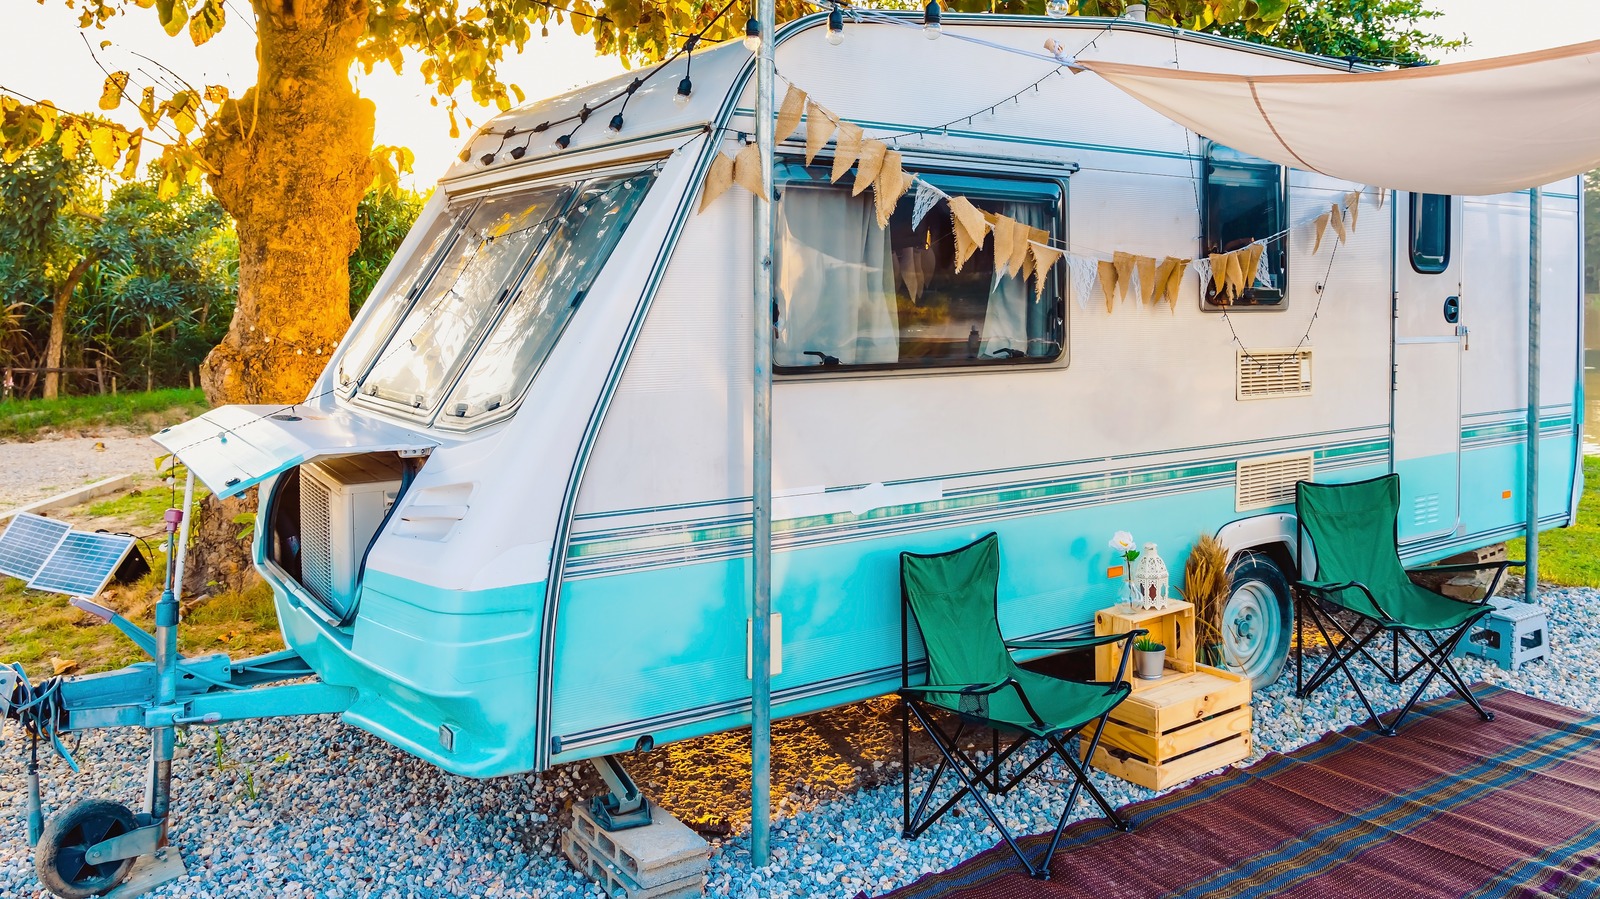 5 Of The Best Retro Style Campers You Can Buy In 2023 – SlashGear